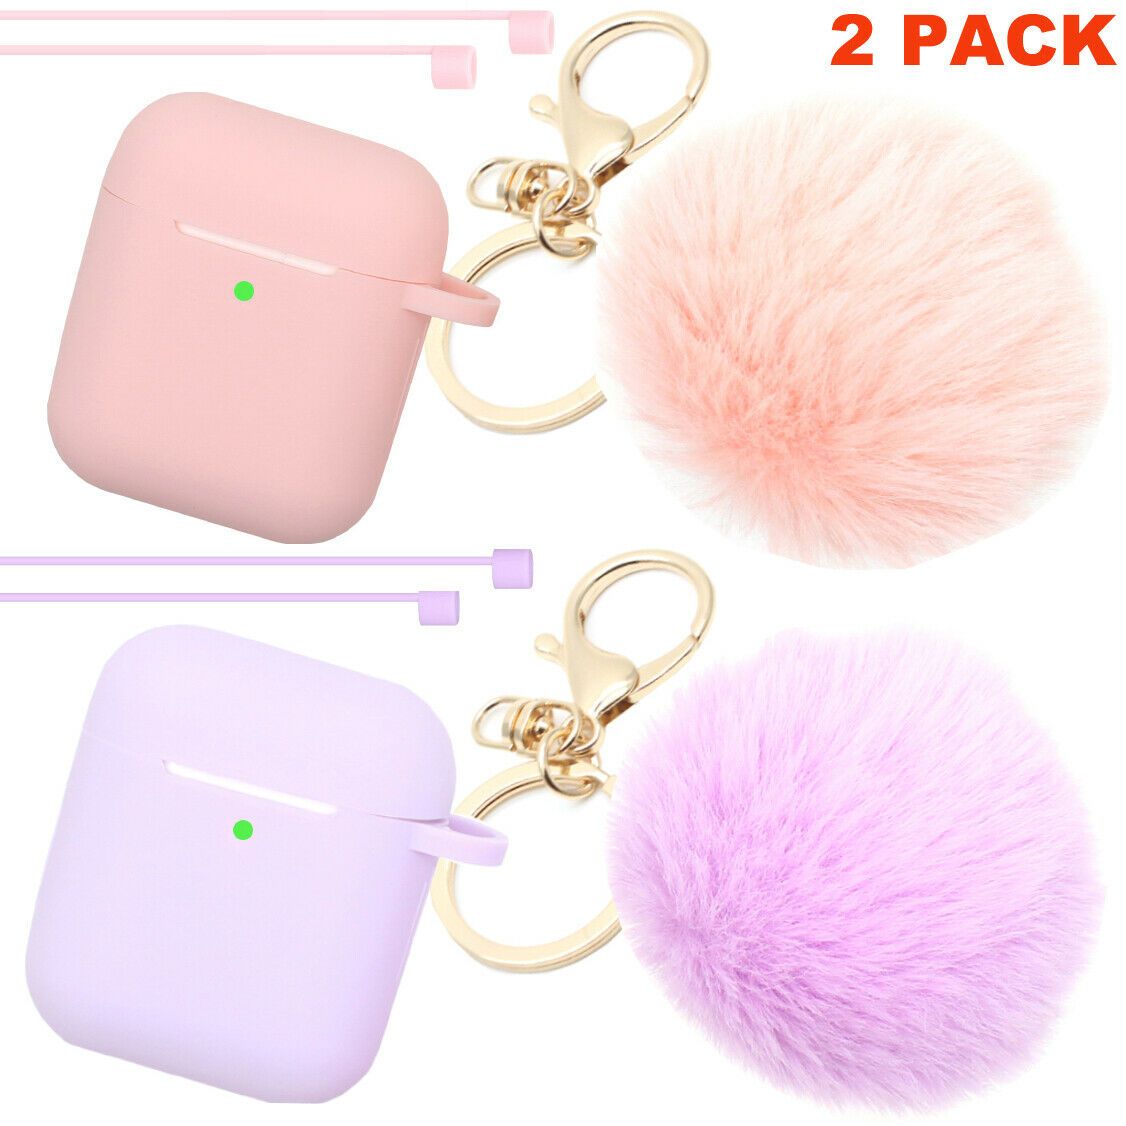 Cute Airpods Silicone Case Cover w/Fur Ball Keychain Strap for Apple Airpods 1/2 ervin.accessories Pink+Purple (2 Pack) 